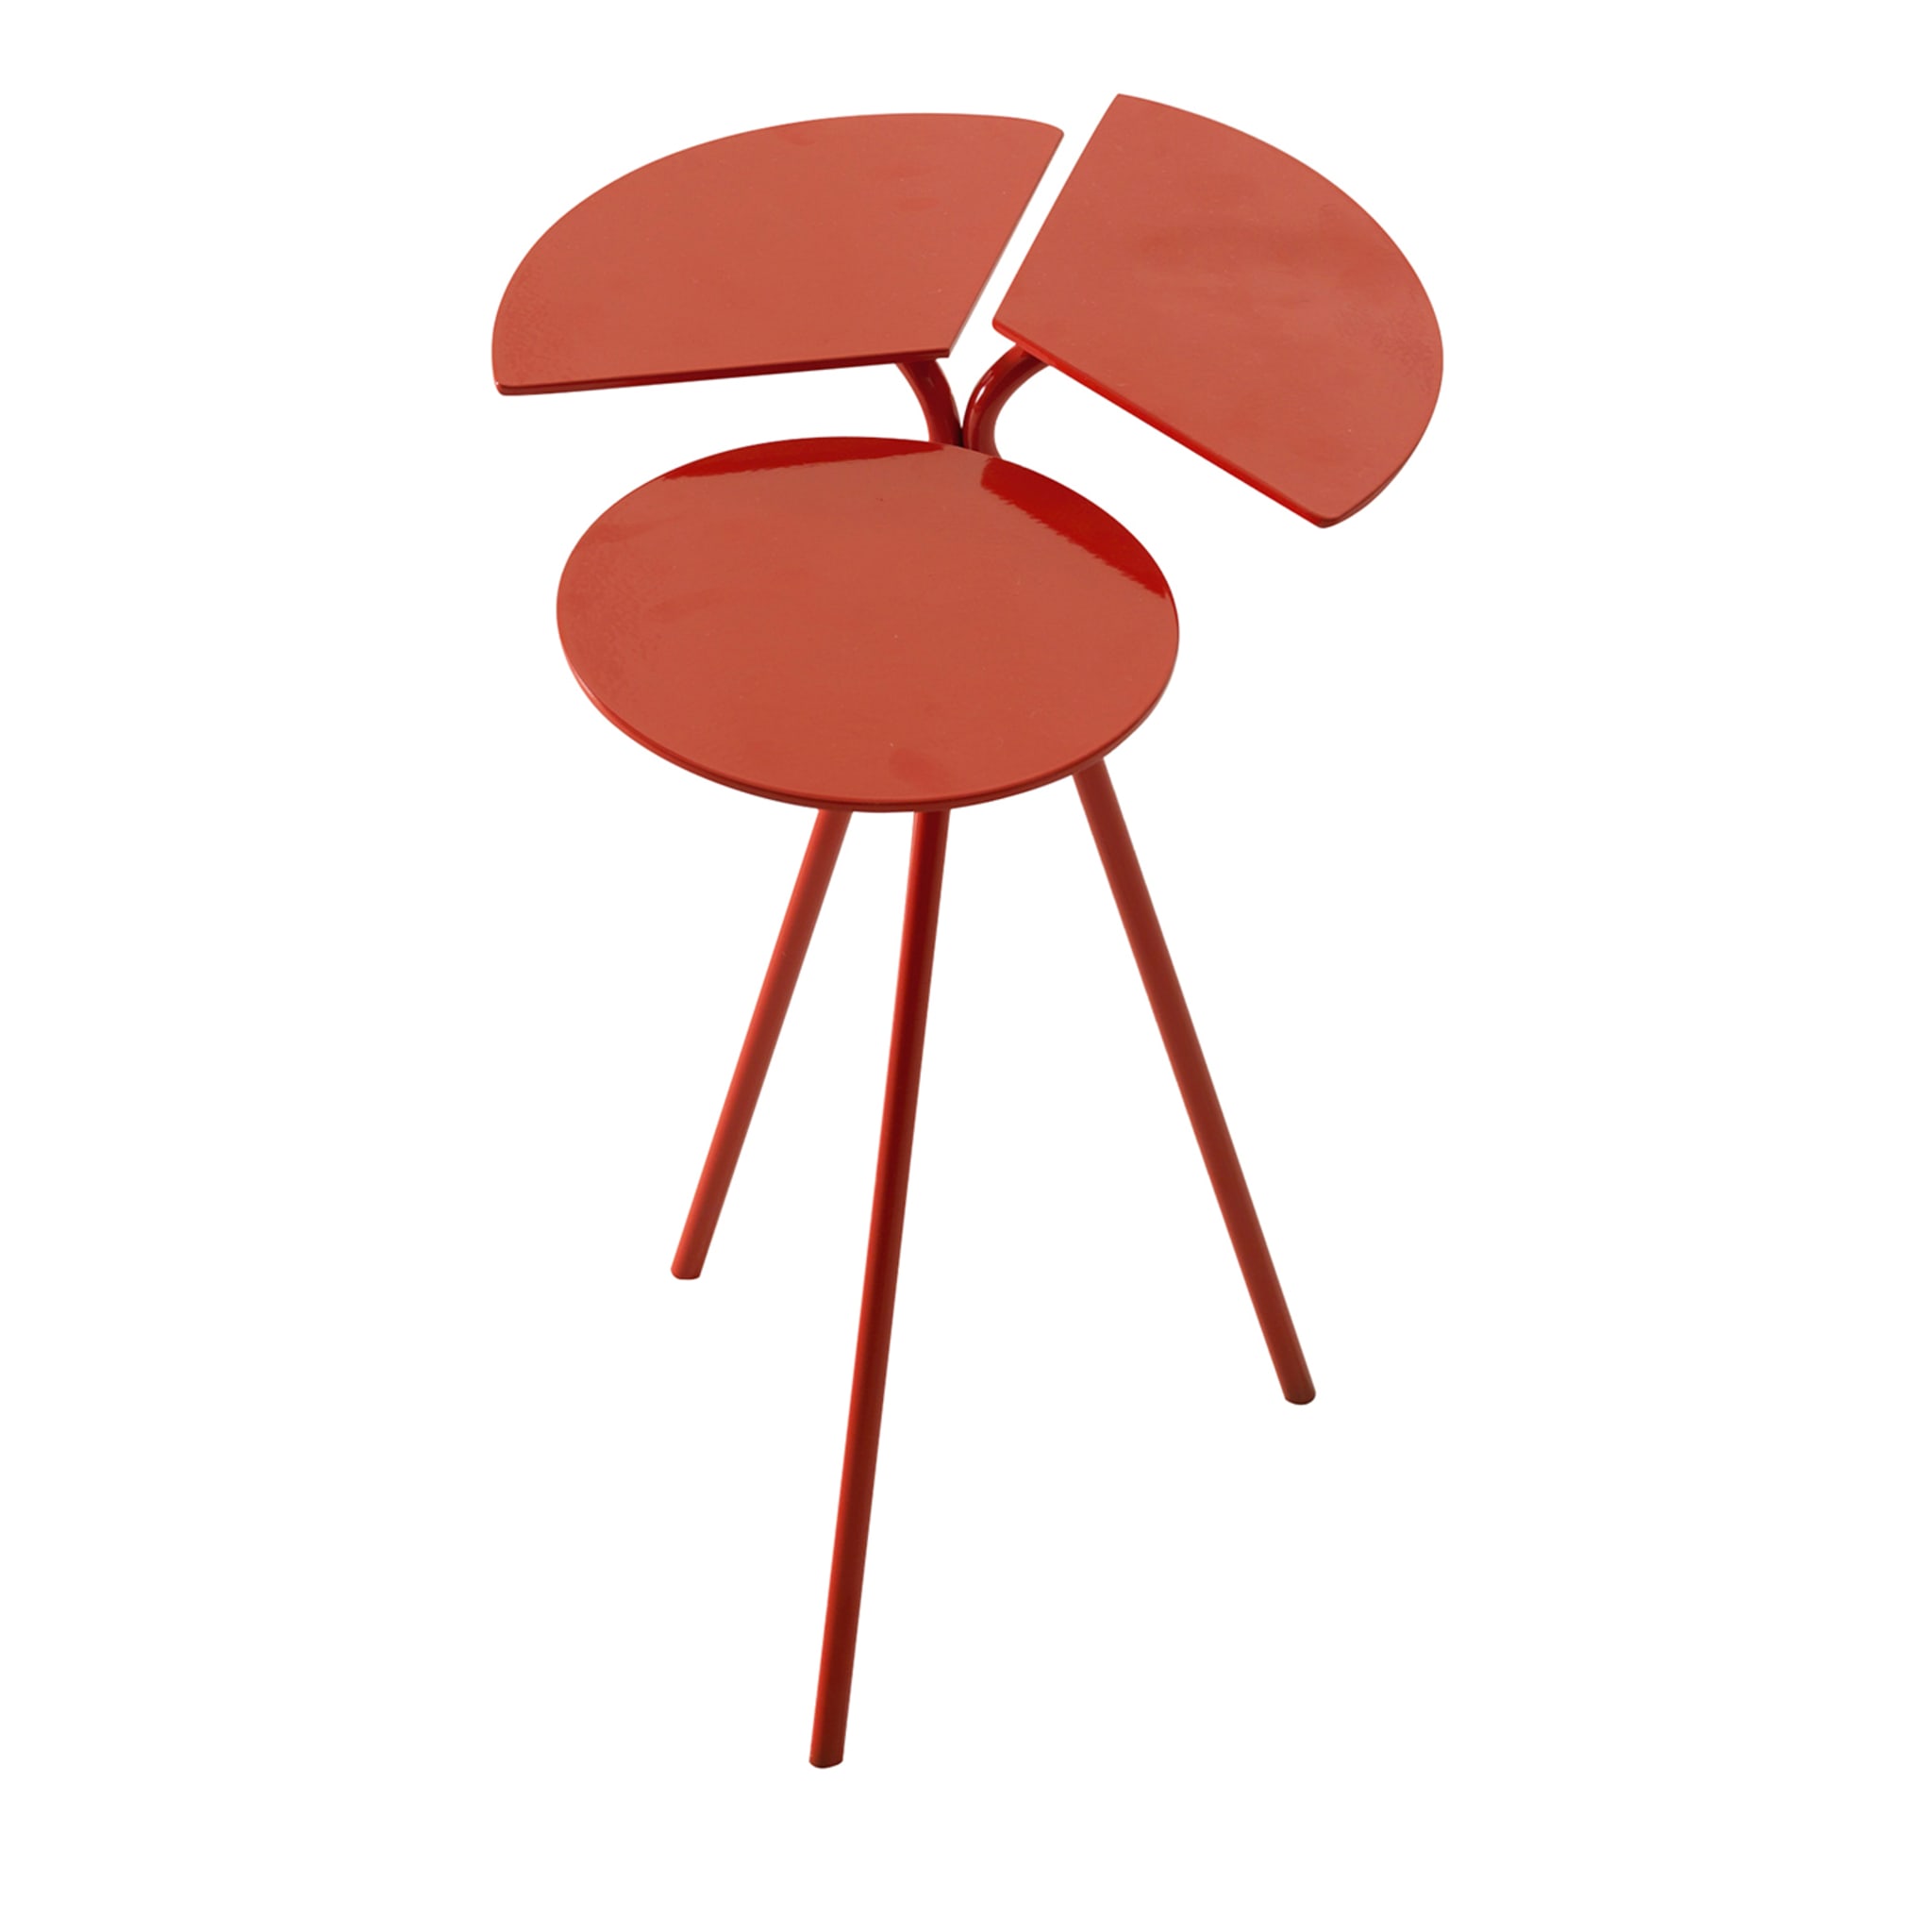 Lady Bug Red Side Table by Angeletti Ruzza - Main view